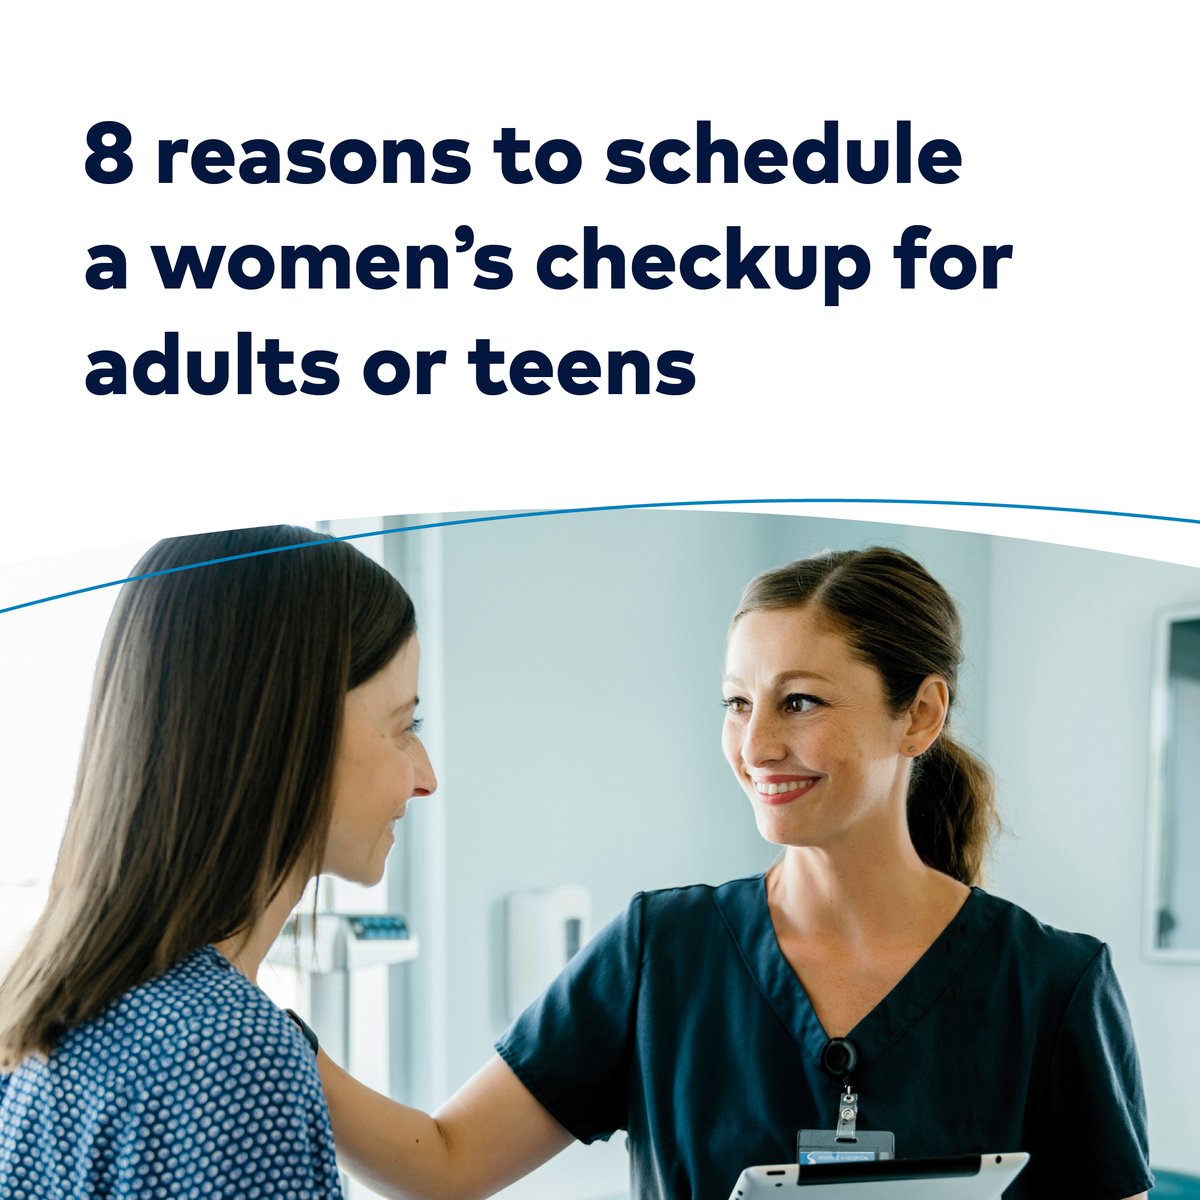 It can be tempting to see a doctor only when something is wrong, but annual checkups are a form of self-care and can prevent future health issues. On Women's Checkup Day, discover eight reasons to schedule an appointment: bit.ly/4dCiSz0 #HealthierTomorrows #WomensHealth